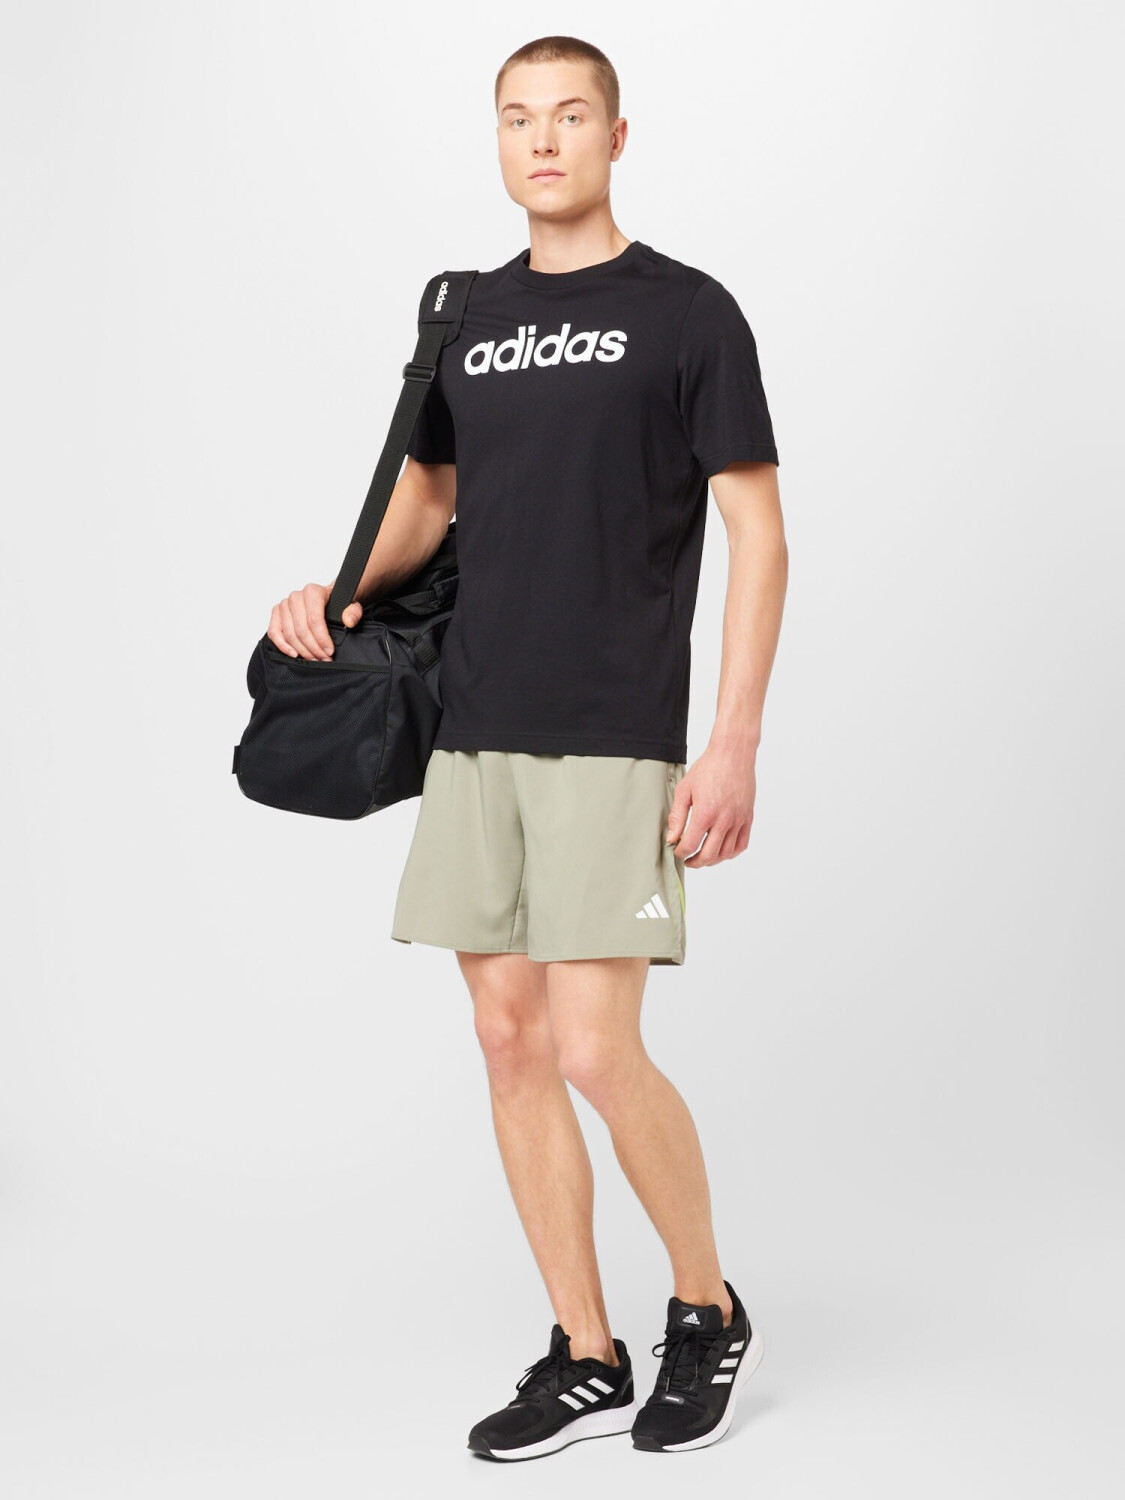 from Embroidered Adidas Linear T-Shirt Best black on Logo (IC9274) (Today) Essentials Buy Deals £11.77 –